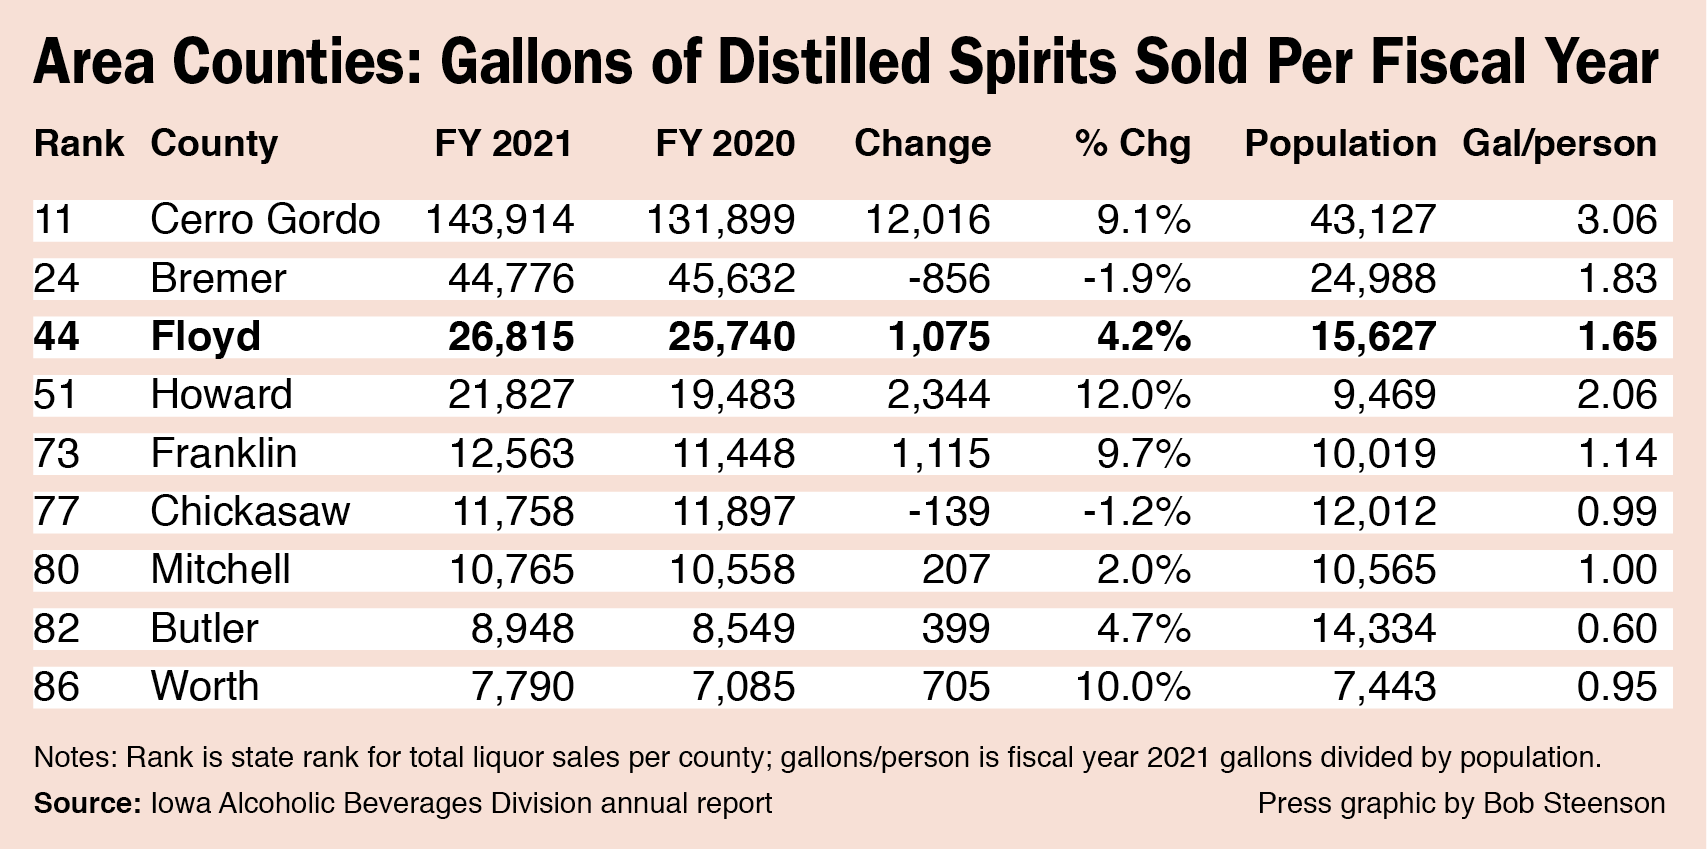 Most area counties saw liquor sale increases last fiscal year